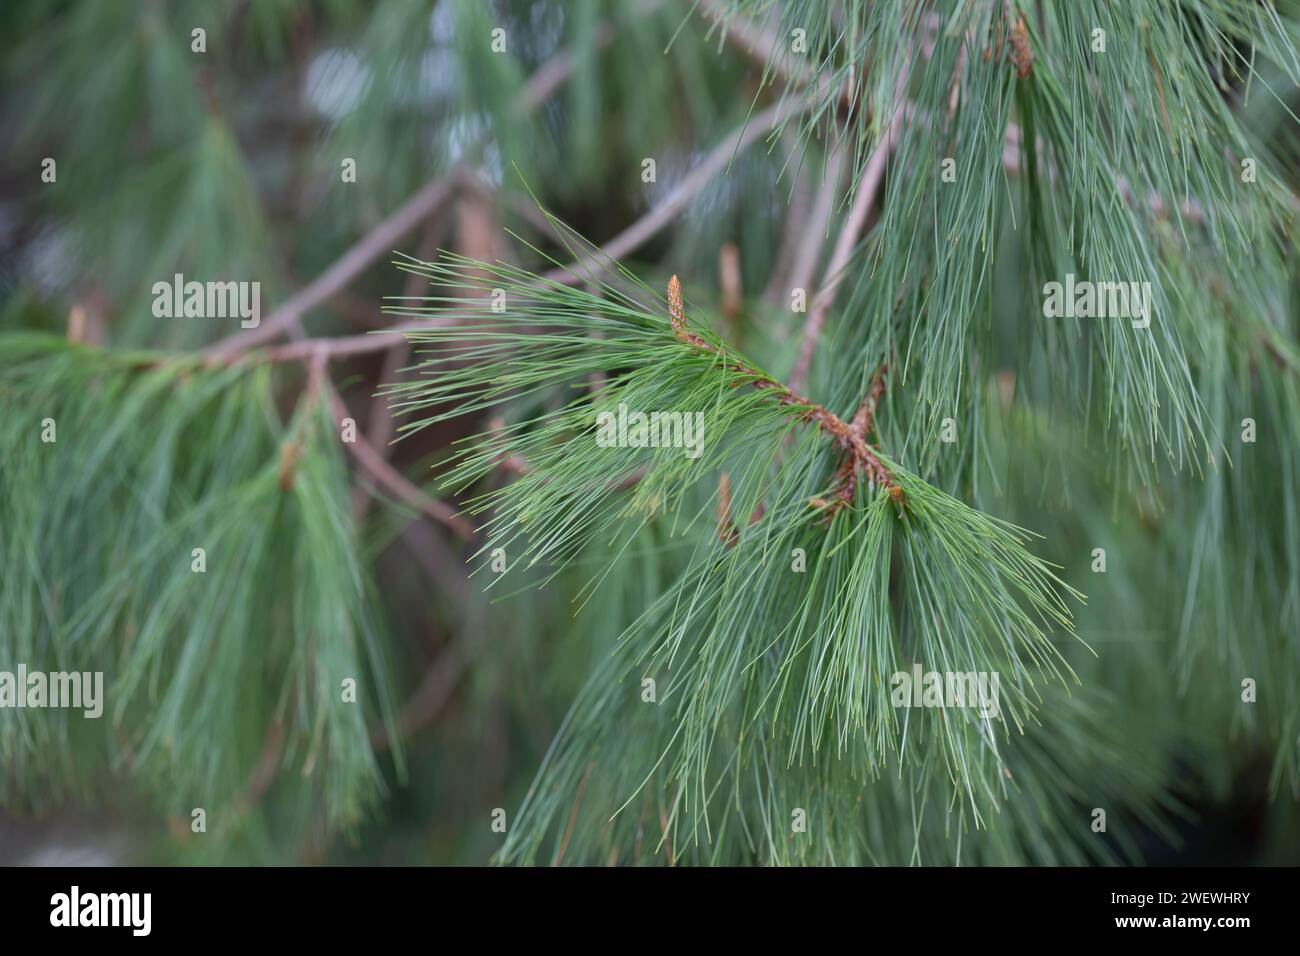 Long-coniferous pine. Pinus leiophylla Schiede ex Schltdl. Commonly known as the thin-leaved pine, it is a species of coniferous trees in the Pine fam Stock Photo